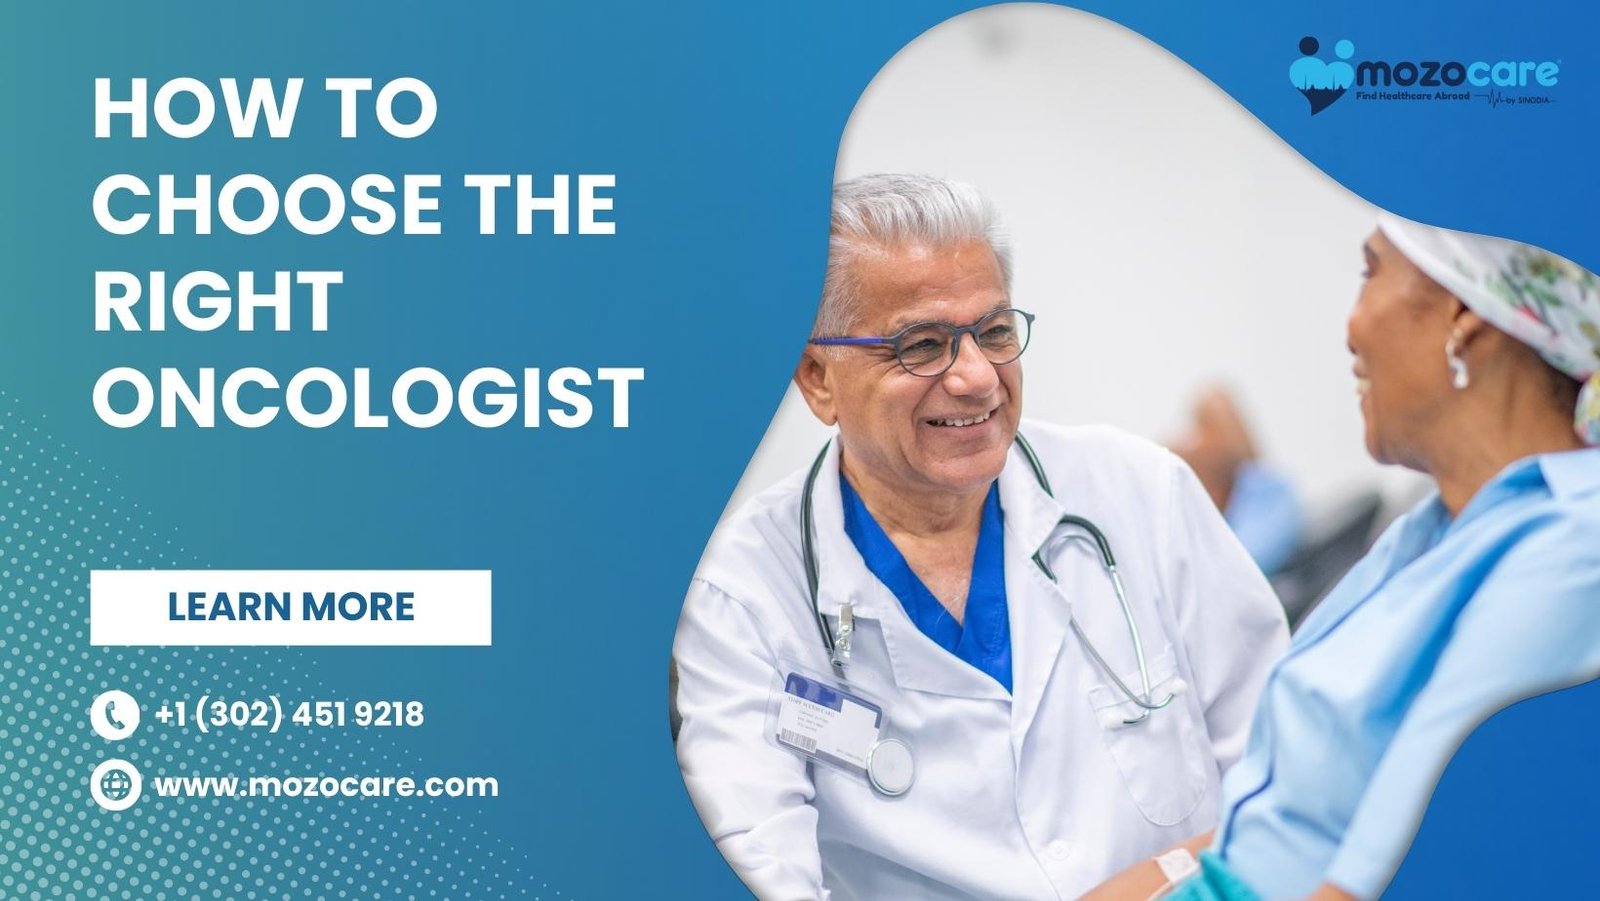 7 Tips on choosing right oncologist